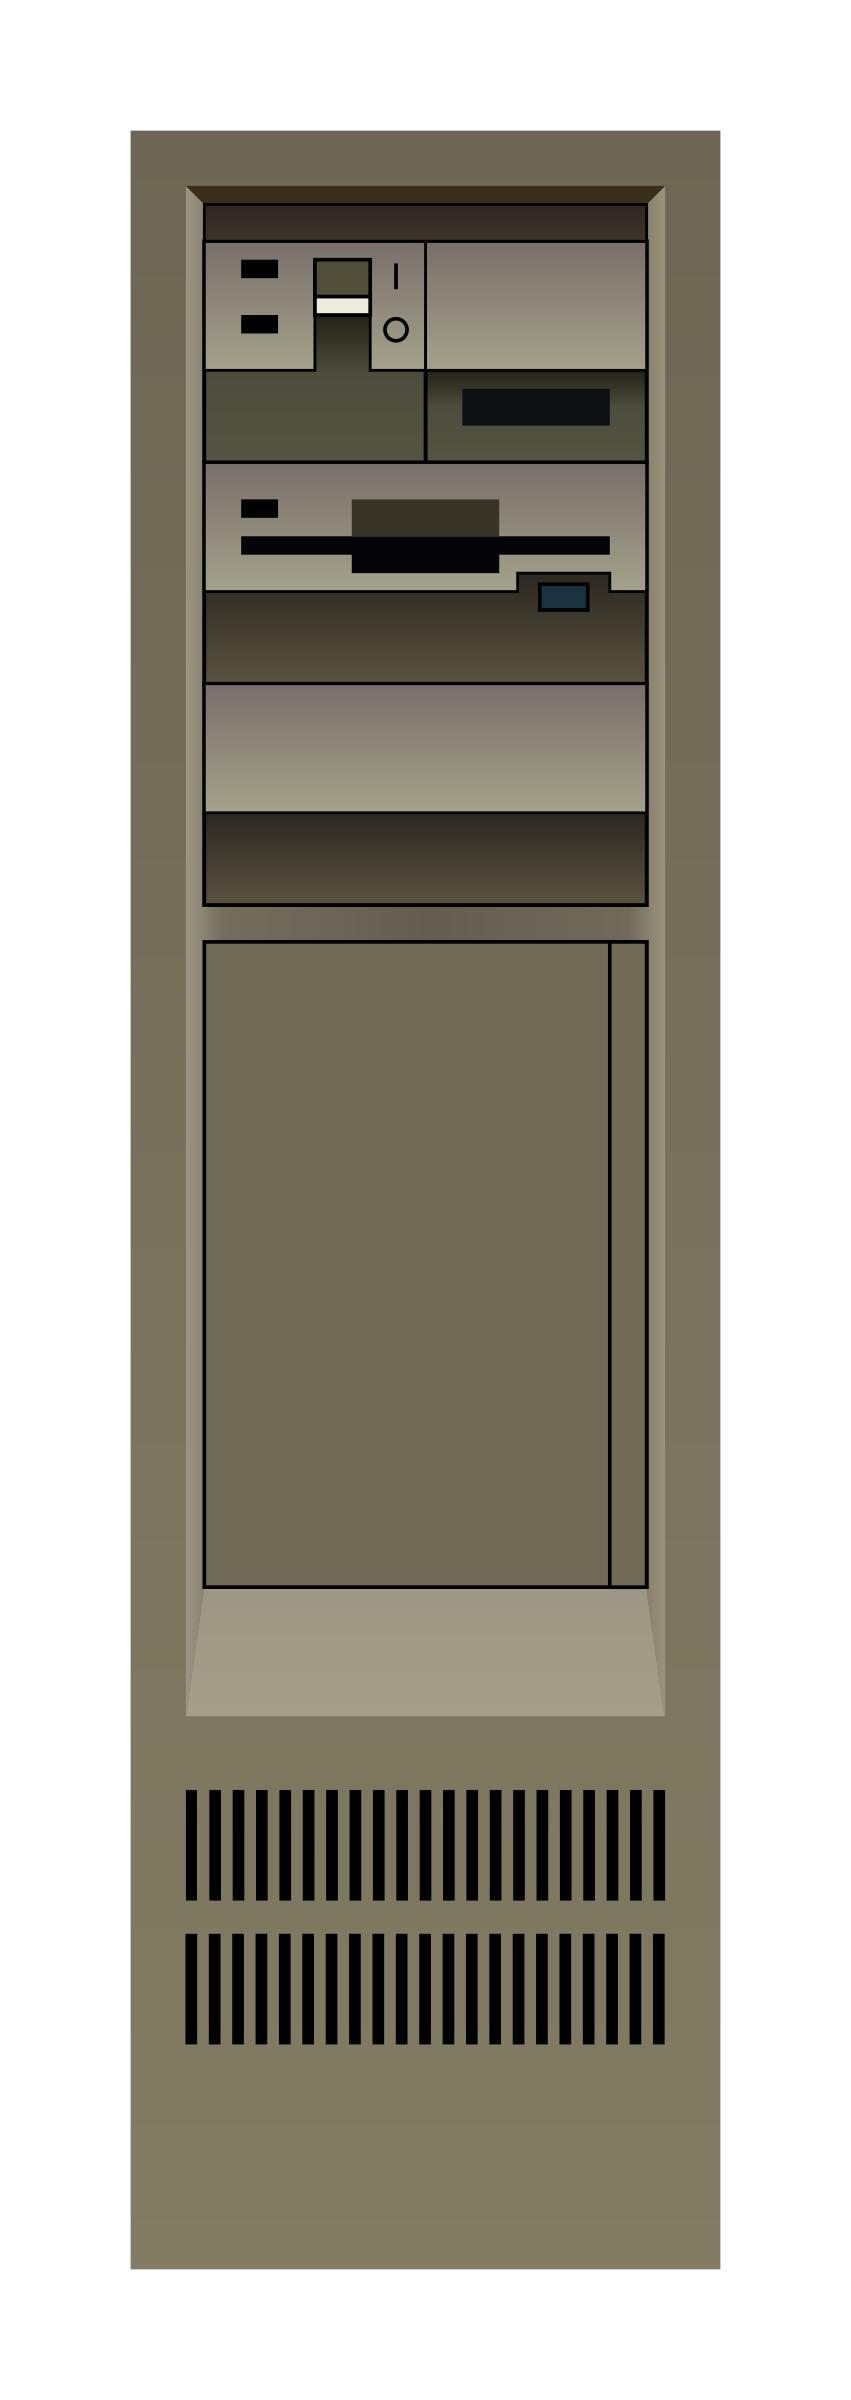 Early 90s computer png transparent